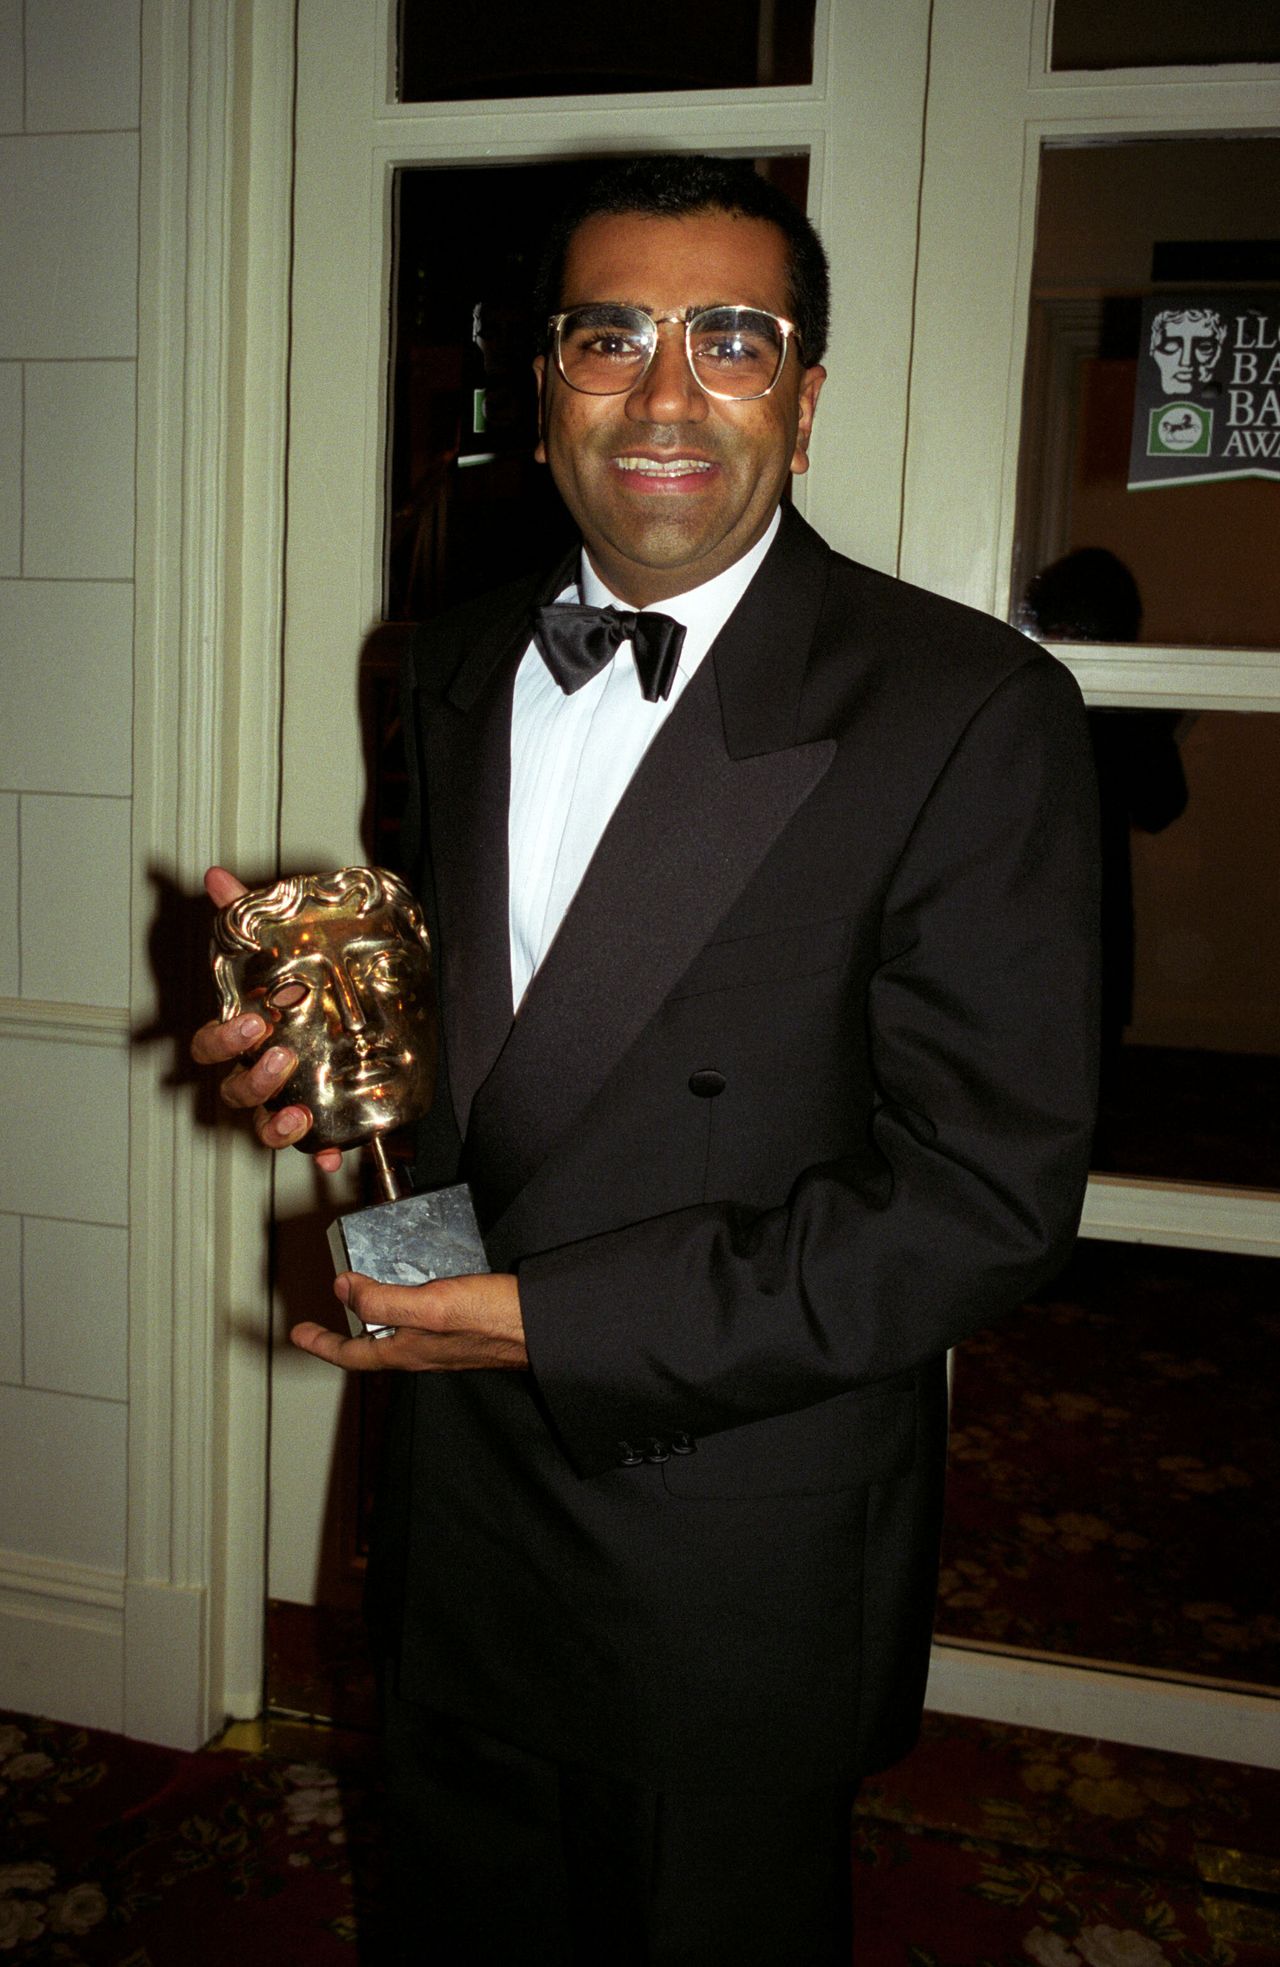 Bashir with his Bafta award for the interview, pictured on 21 April 1996 